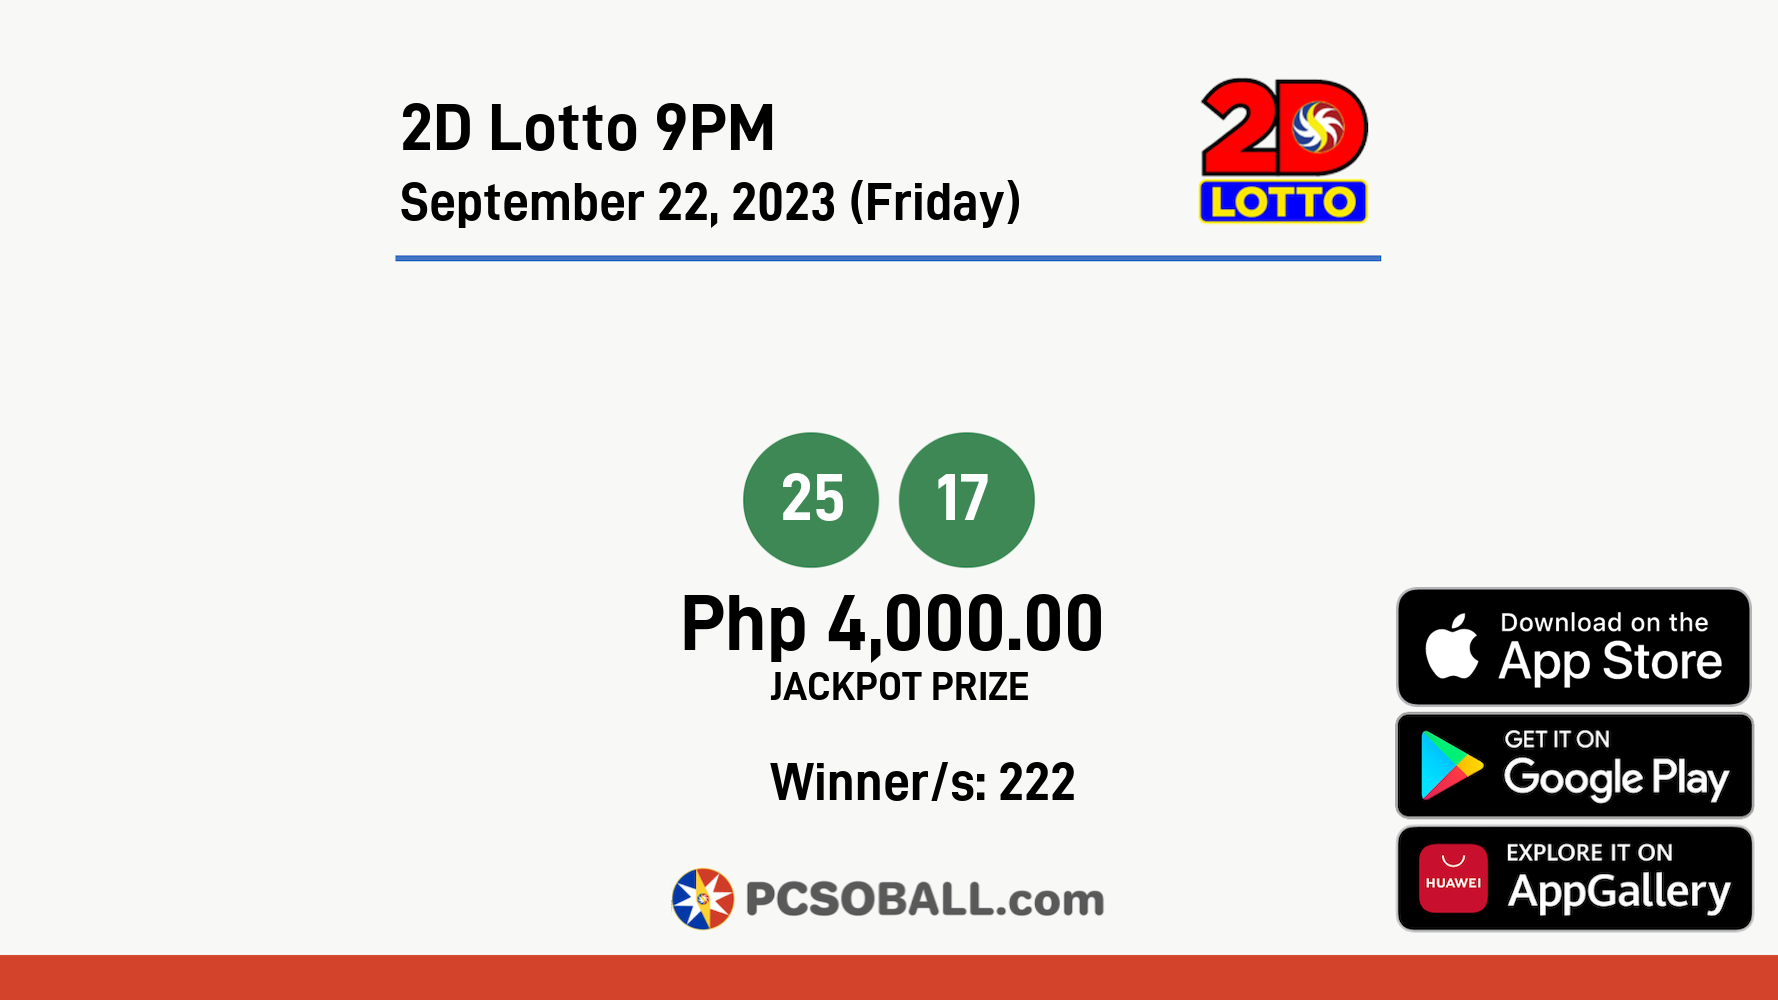 2D Lotto 9PM September 22, 2023 (Friday) Result